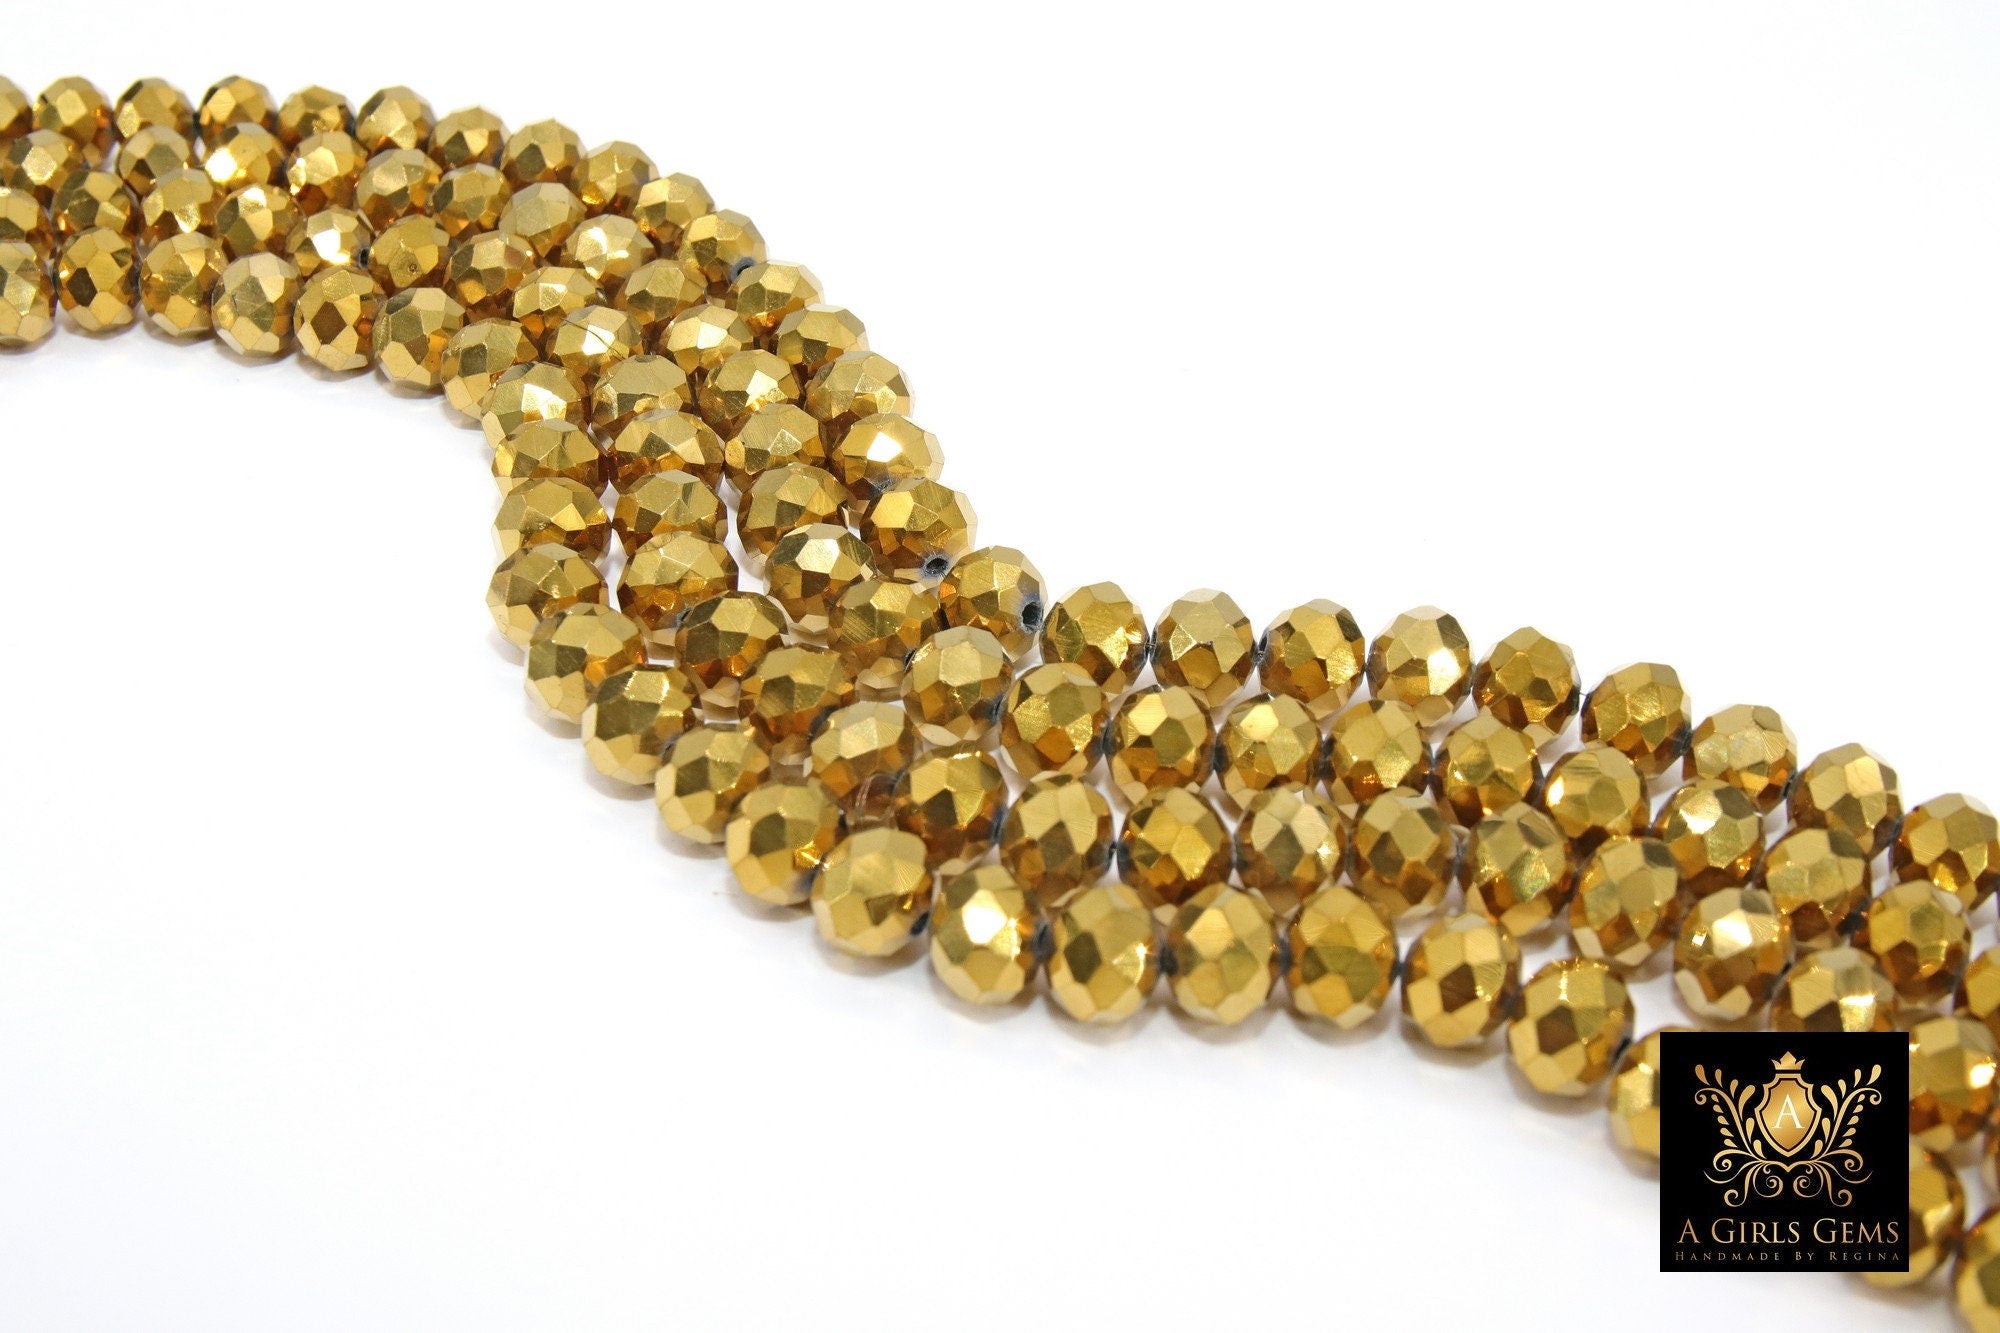 Gold LSU Tiger Beads, Electroplated Gold Crystal Beads BS #223, Rondelle size 7 x 10 mm, 18 Inch Strands